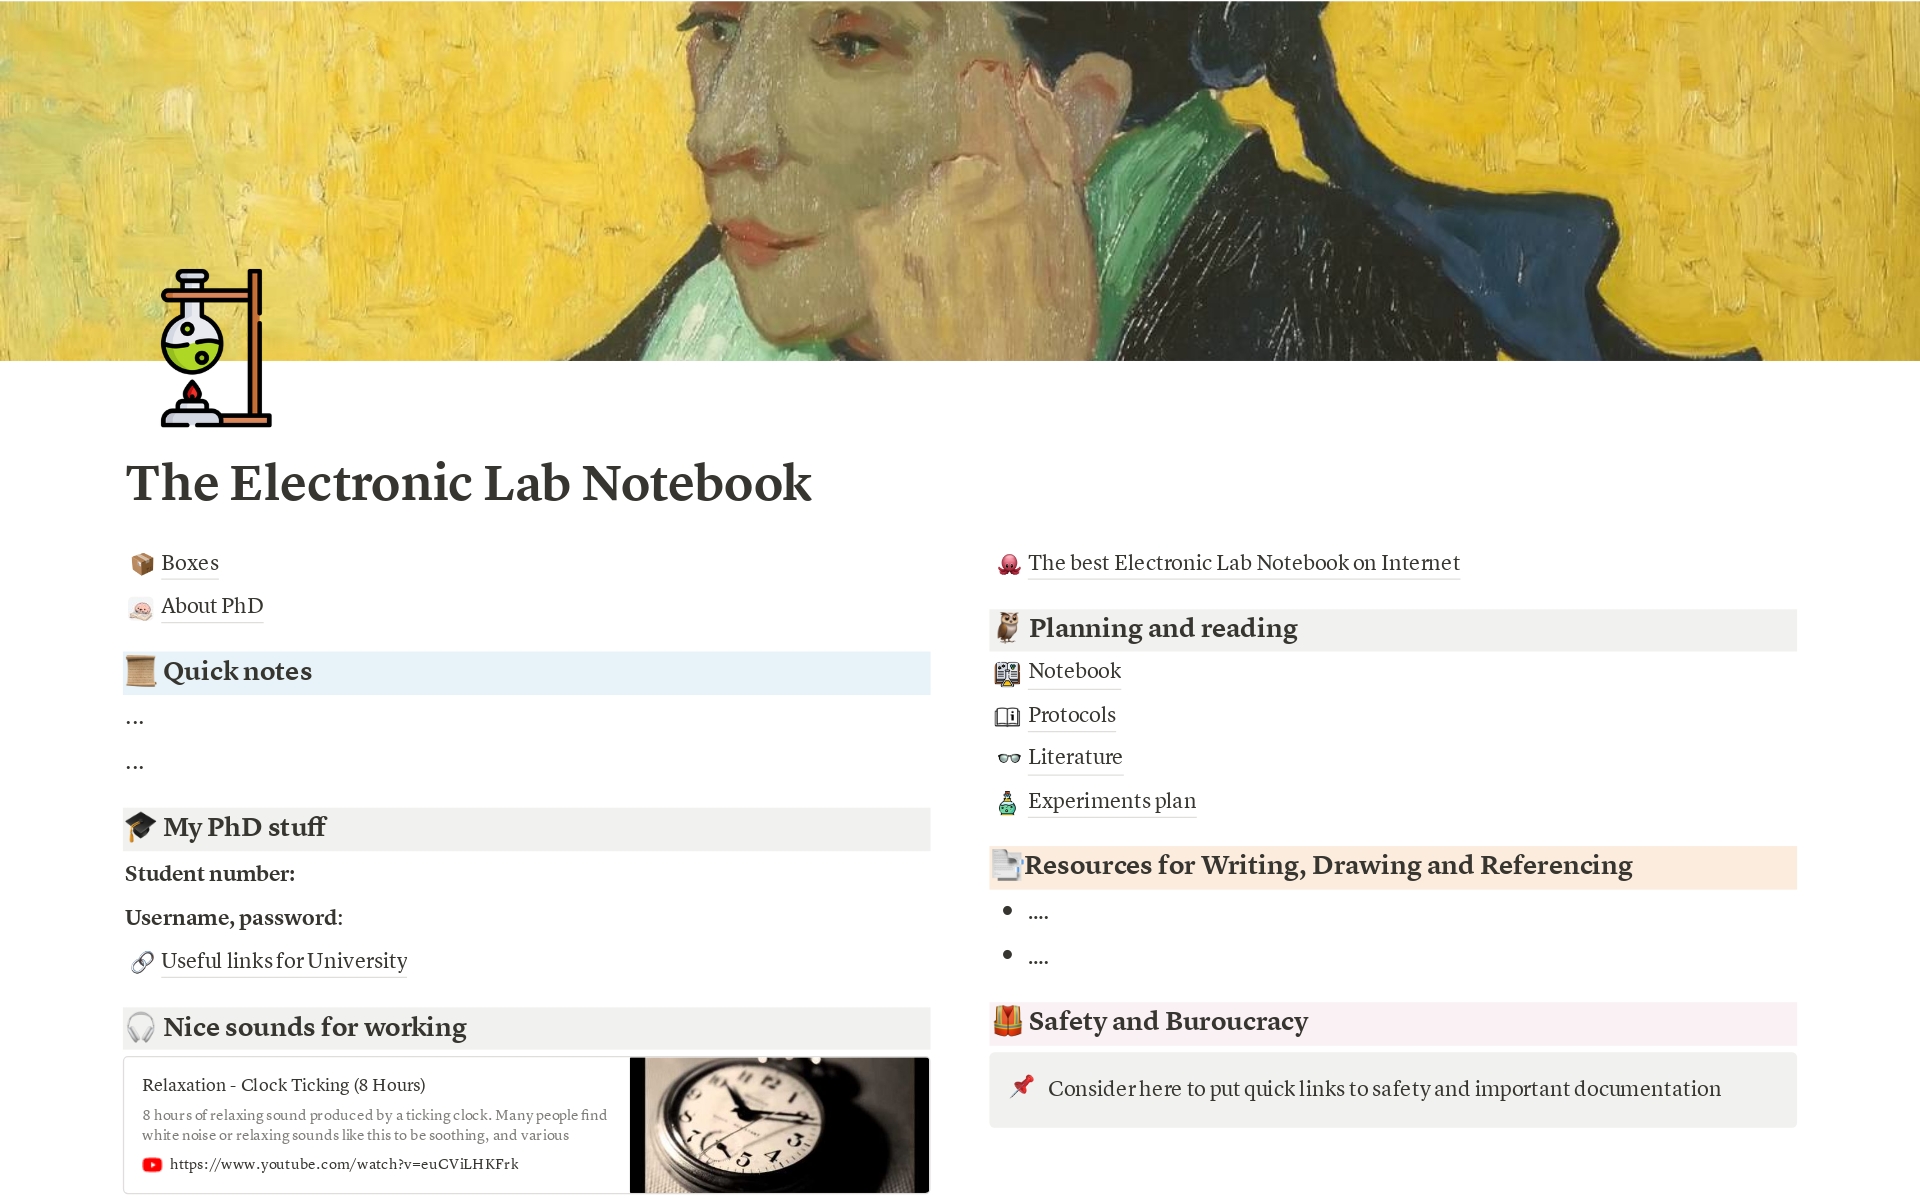 Hey fellow scientist! 🧬 Ready to simplify your lab life? Meet our electronic lab notebook – your new best lab buddy! 📝 Say goodbye to paper chaos and hello to digital zen. With our easy-to-use platform, planning experiments and recording data is a breeze. 